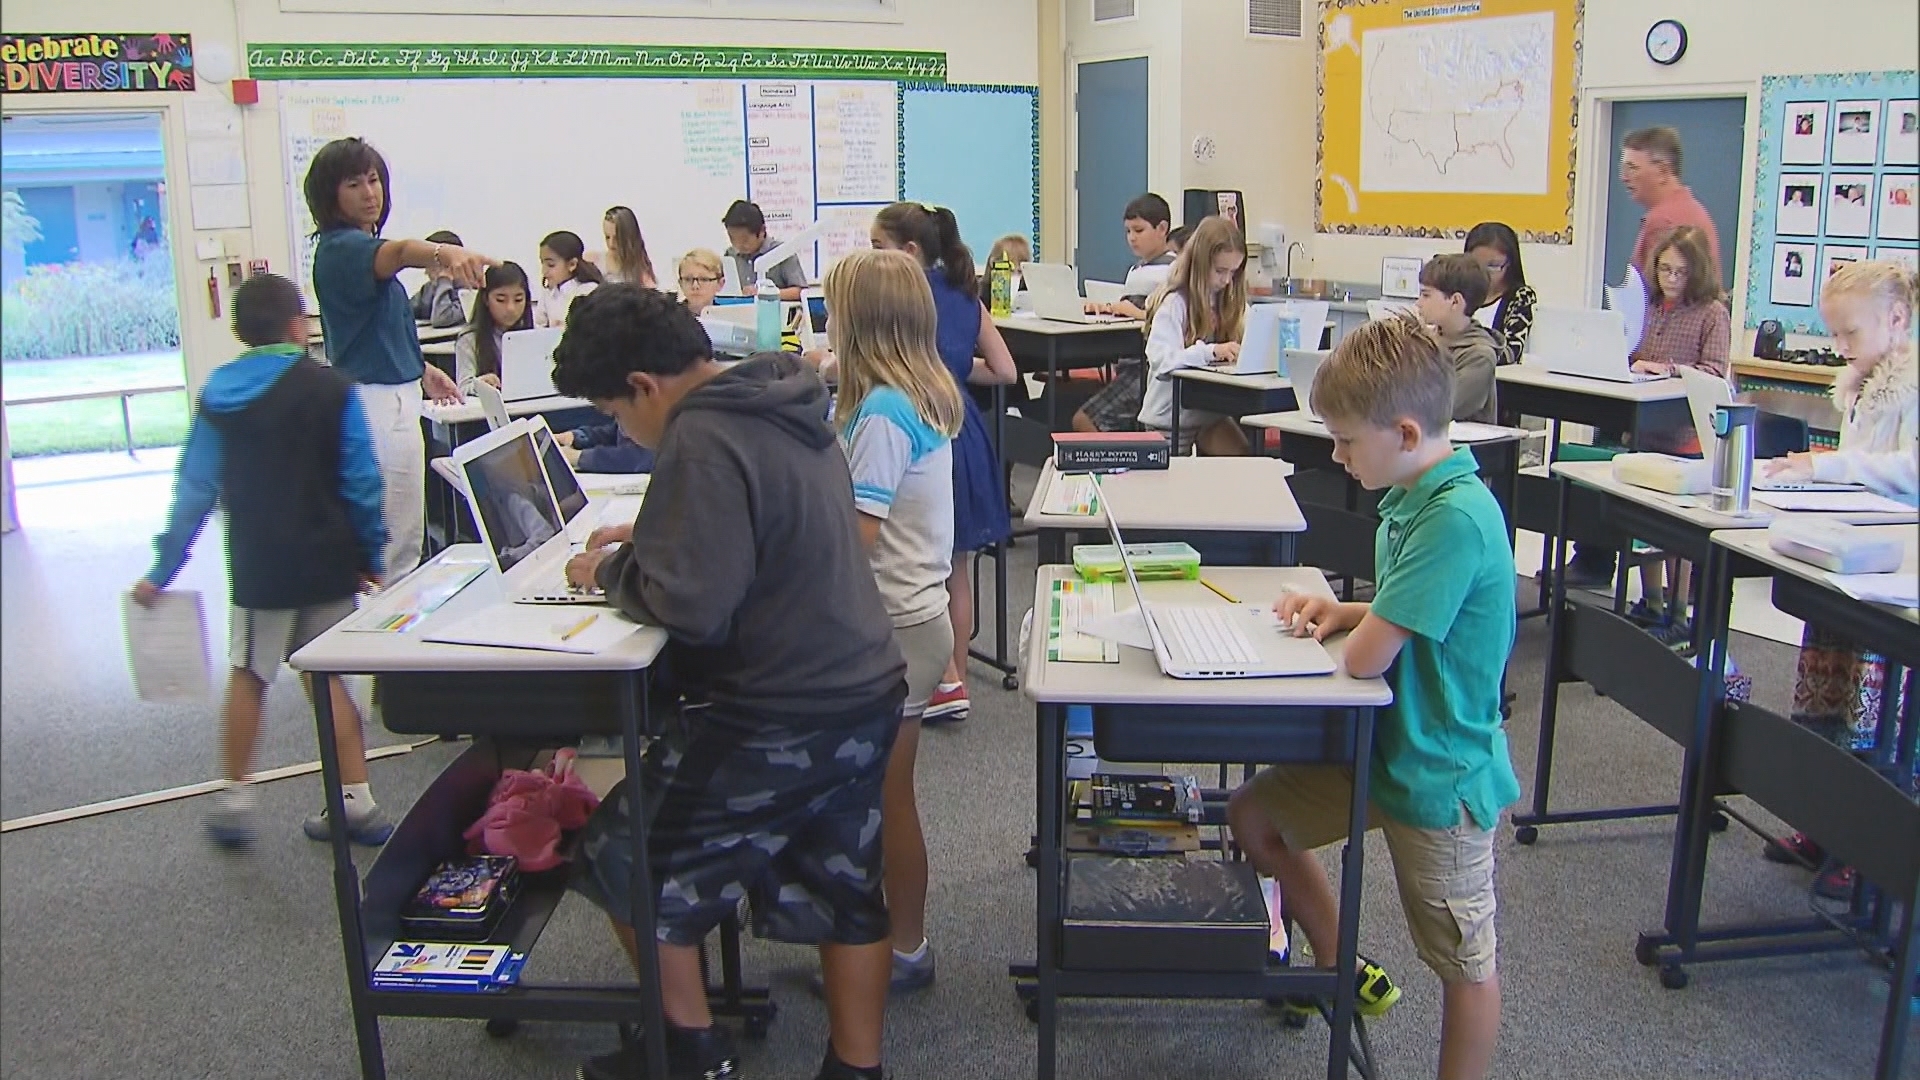 Vallecito Elementary School In Northern California Brings Standing